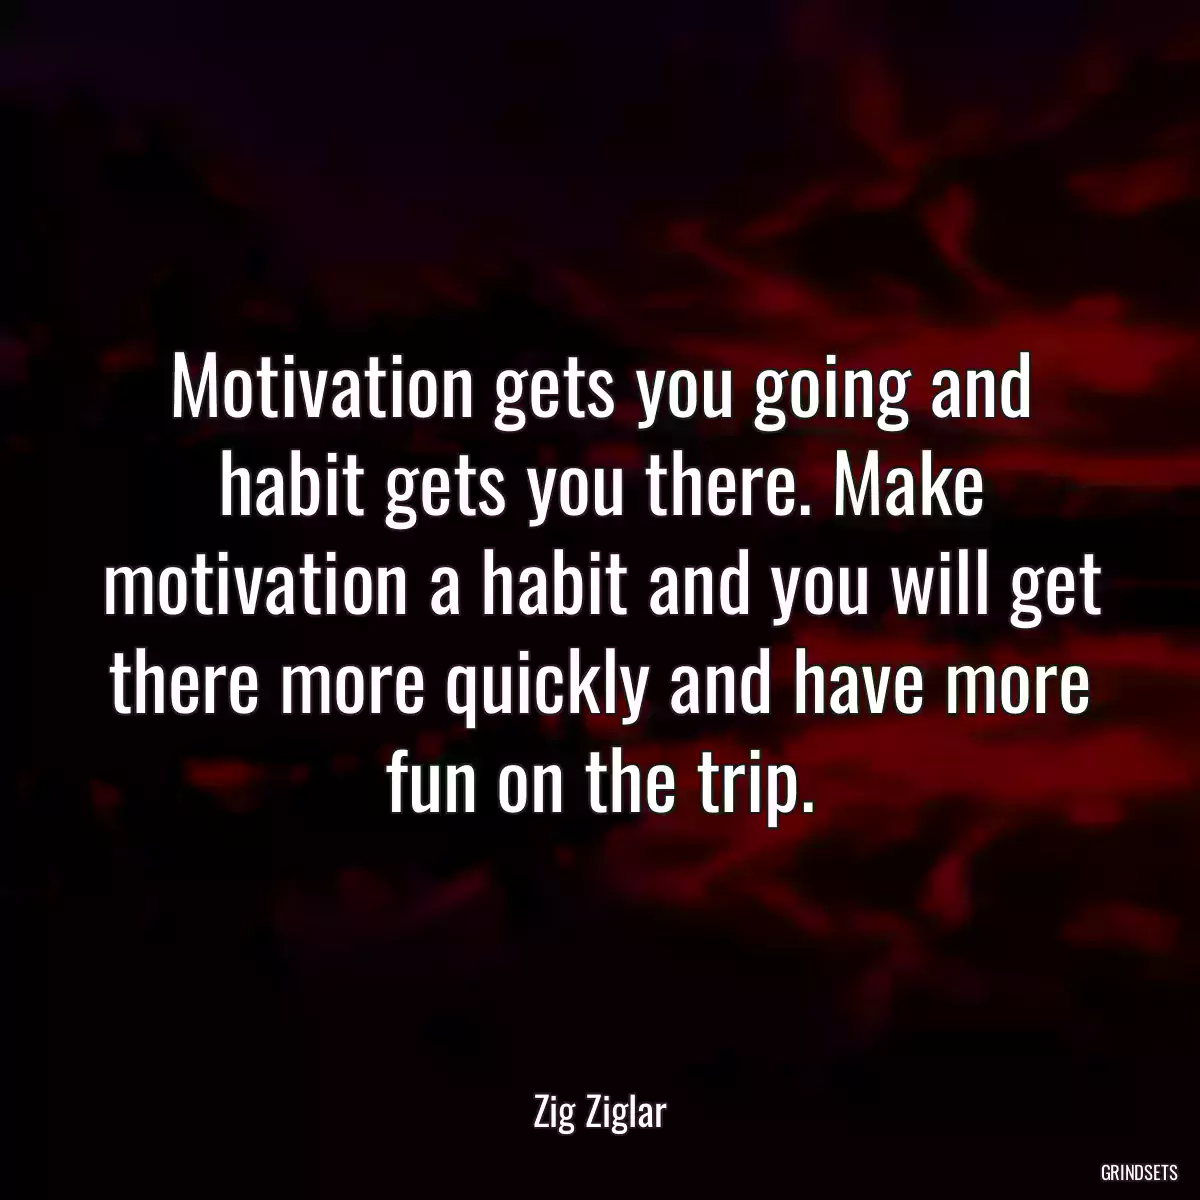 Motivation gets you going and habit gets you there. Make motivation a habit and you will get there more quickly and have more fun on the trip.